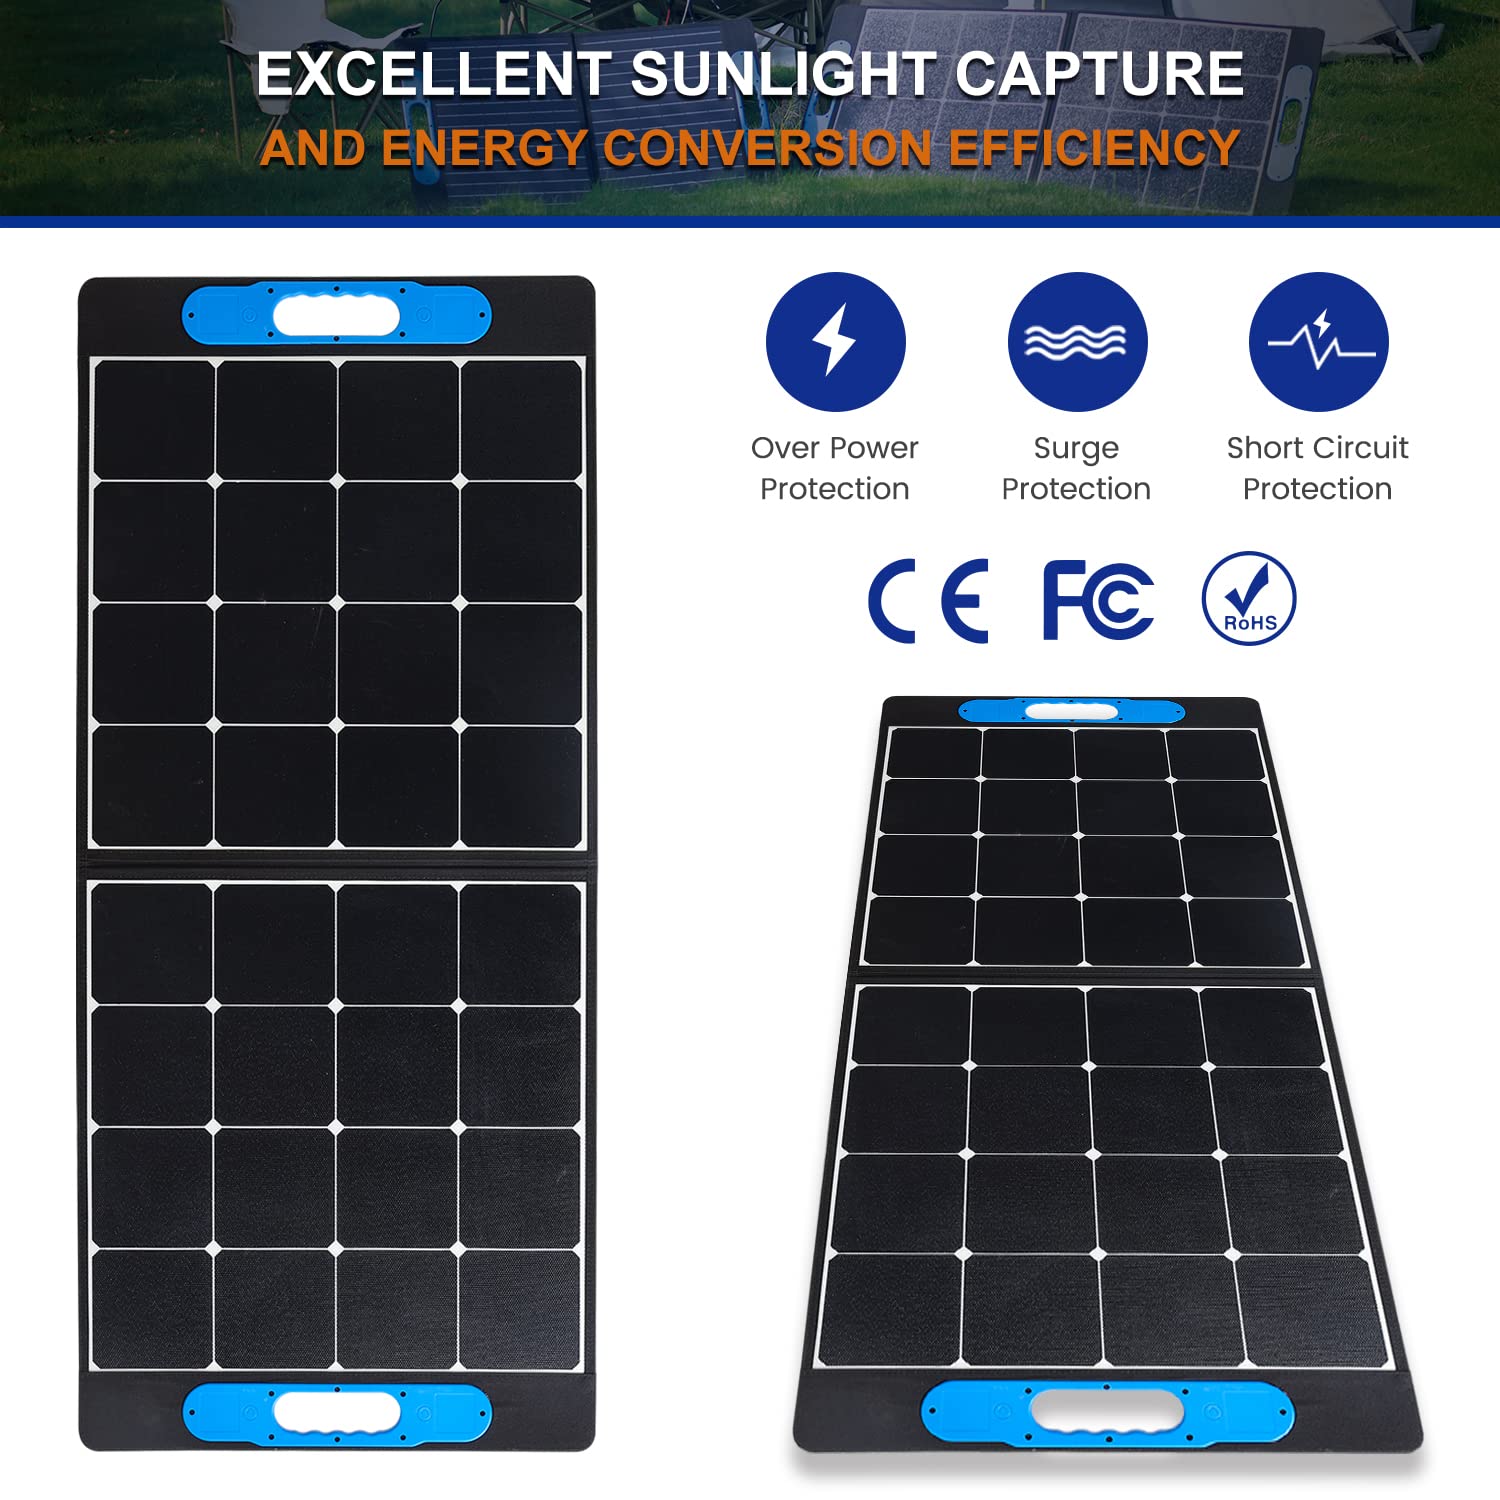 100w Solar Panel Portable, Ericsity Folding Solar Panel for Camping with SunPower Solar Panel Cells Portable Solar Charger Solar Panel for Power Station, Camping RV Hiking,Off-Grid Living or Backyard